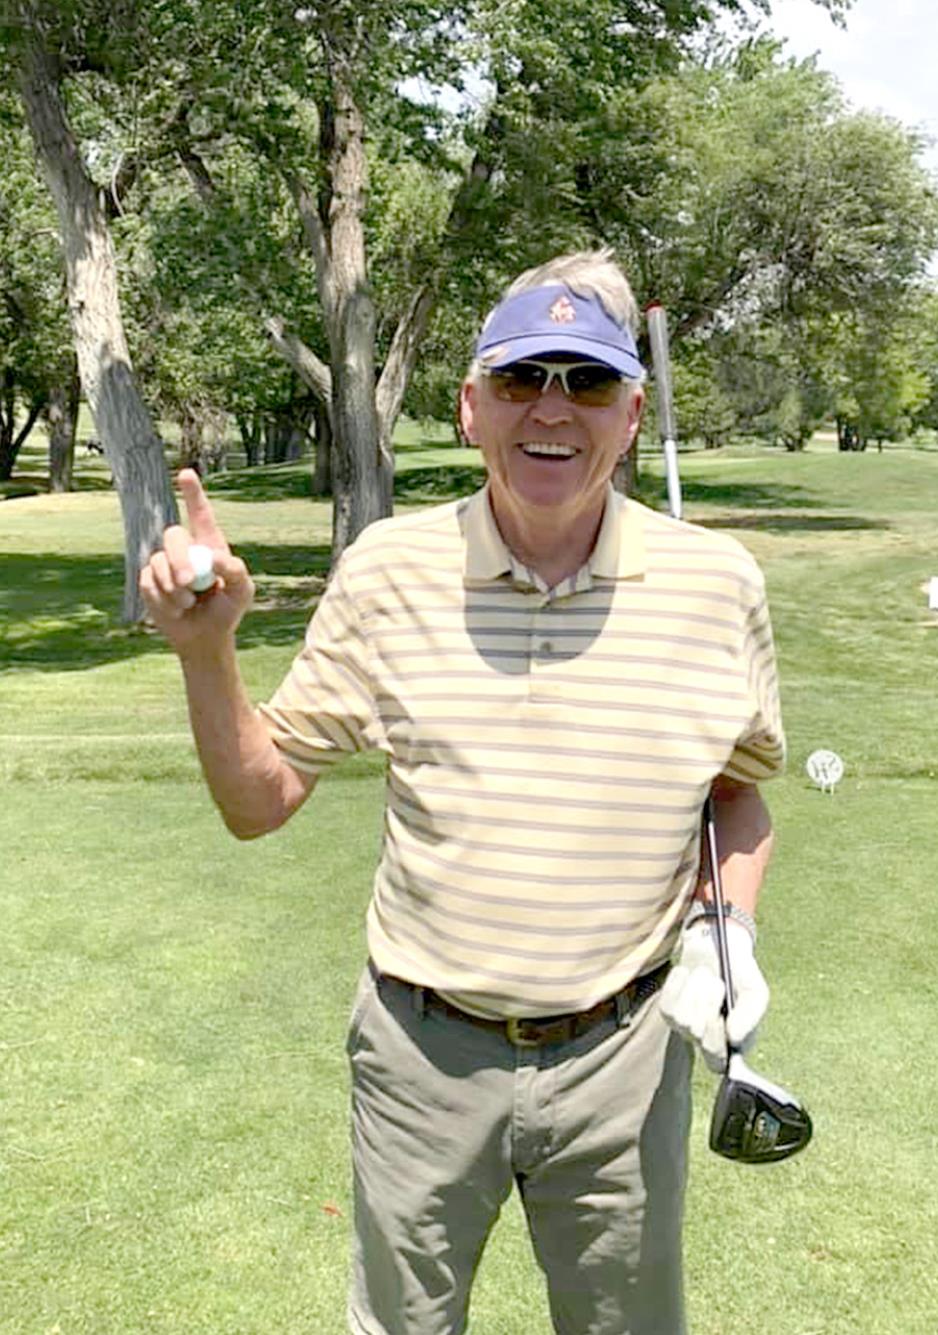 JAMES BERKLEY is all smiles after getting a hole-in-one last Sunday at Smoky Hill Country Club in Hays.